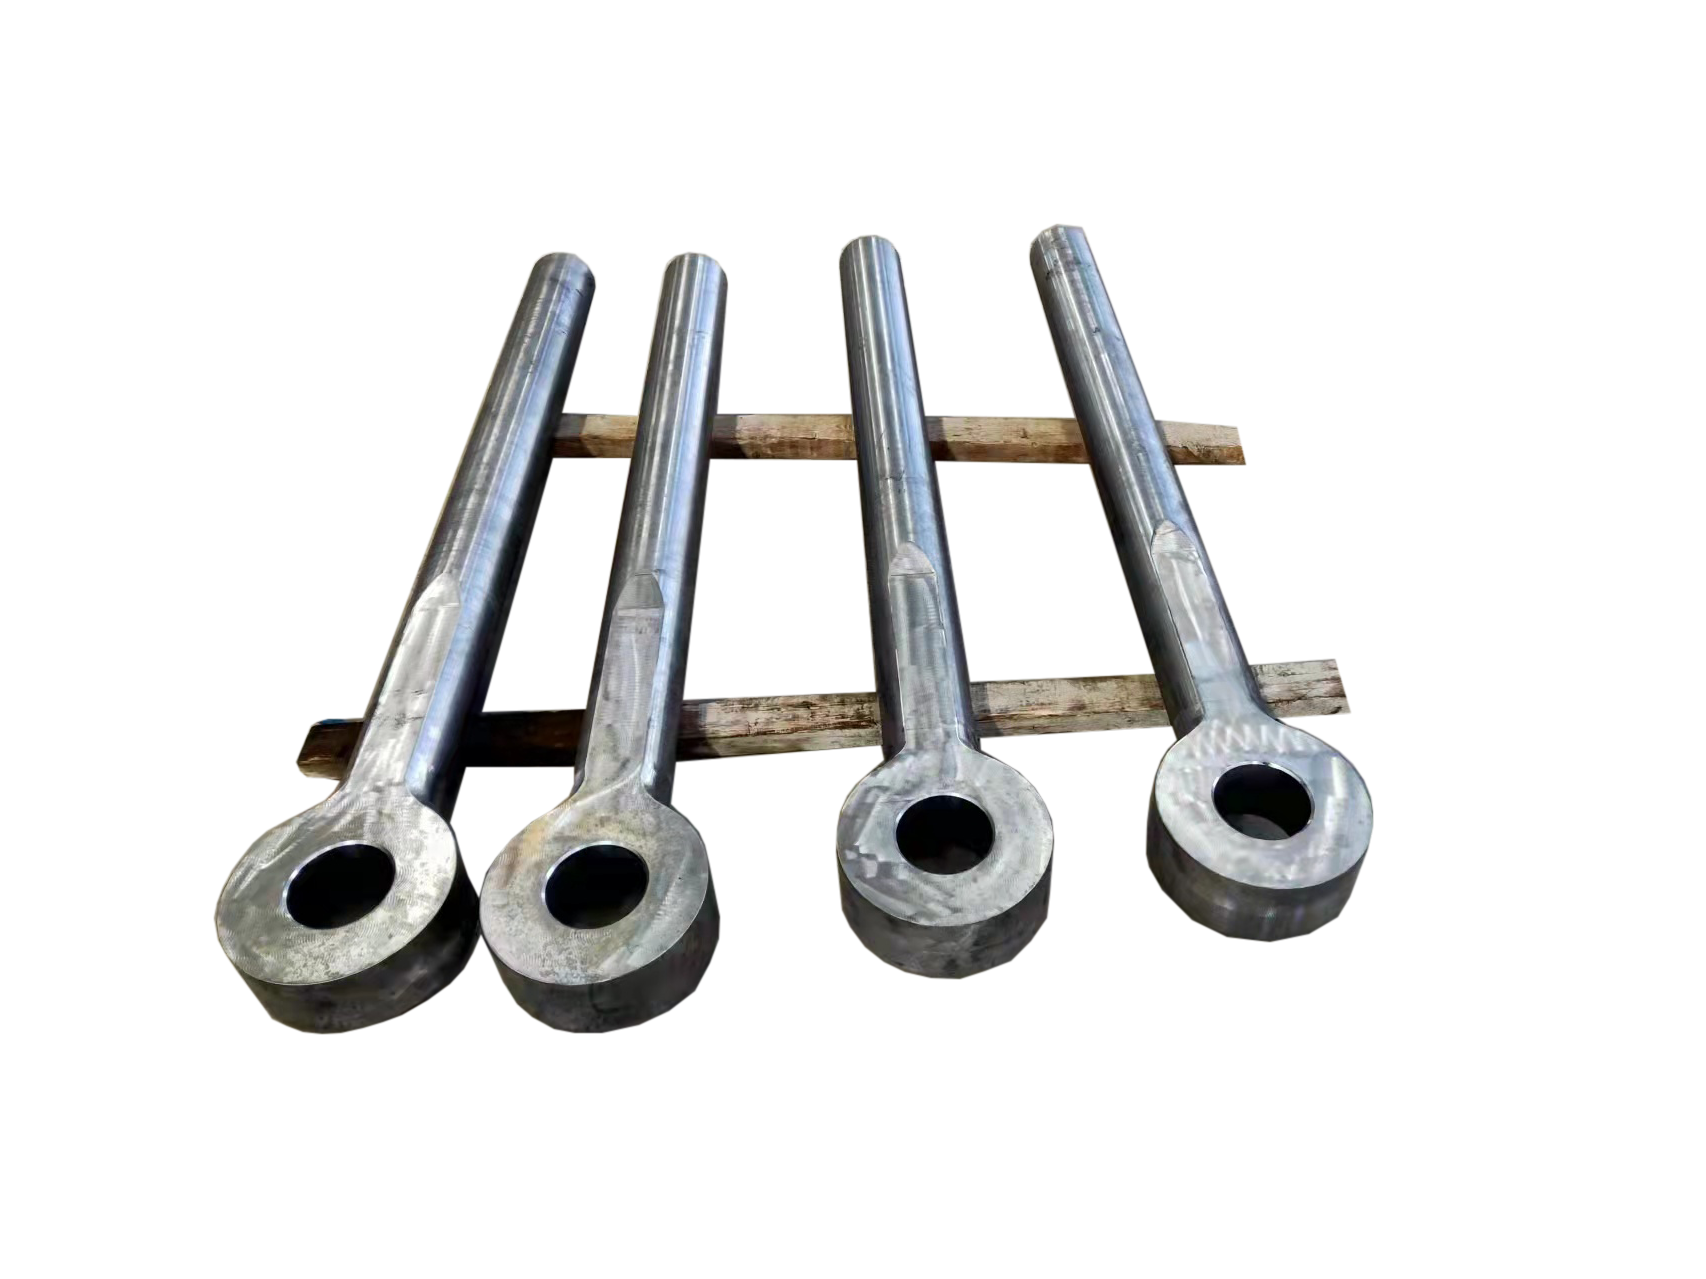 OEM China Forged Round Bar Suppliers - CUSTOM Forged Piston Rods – DHDZ